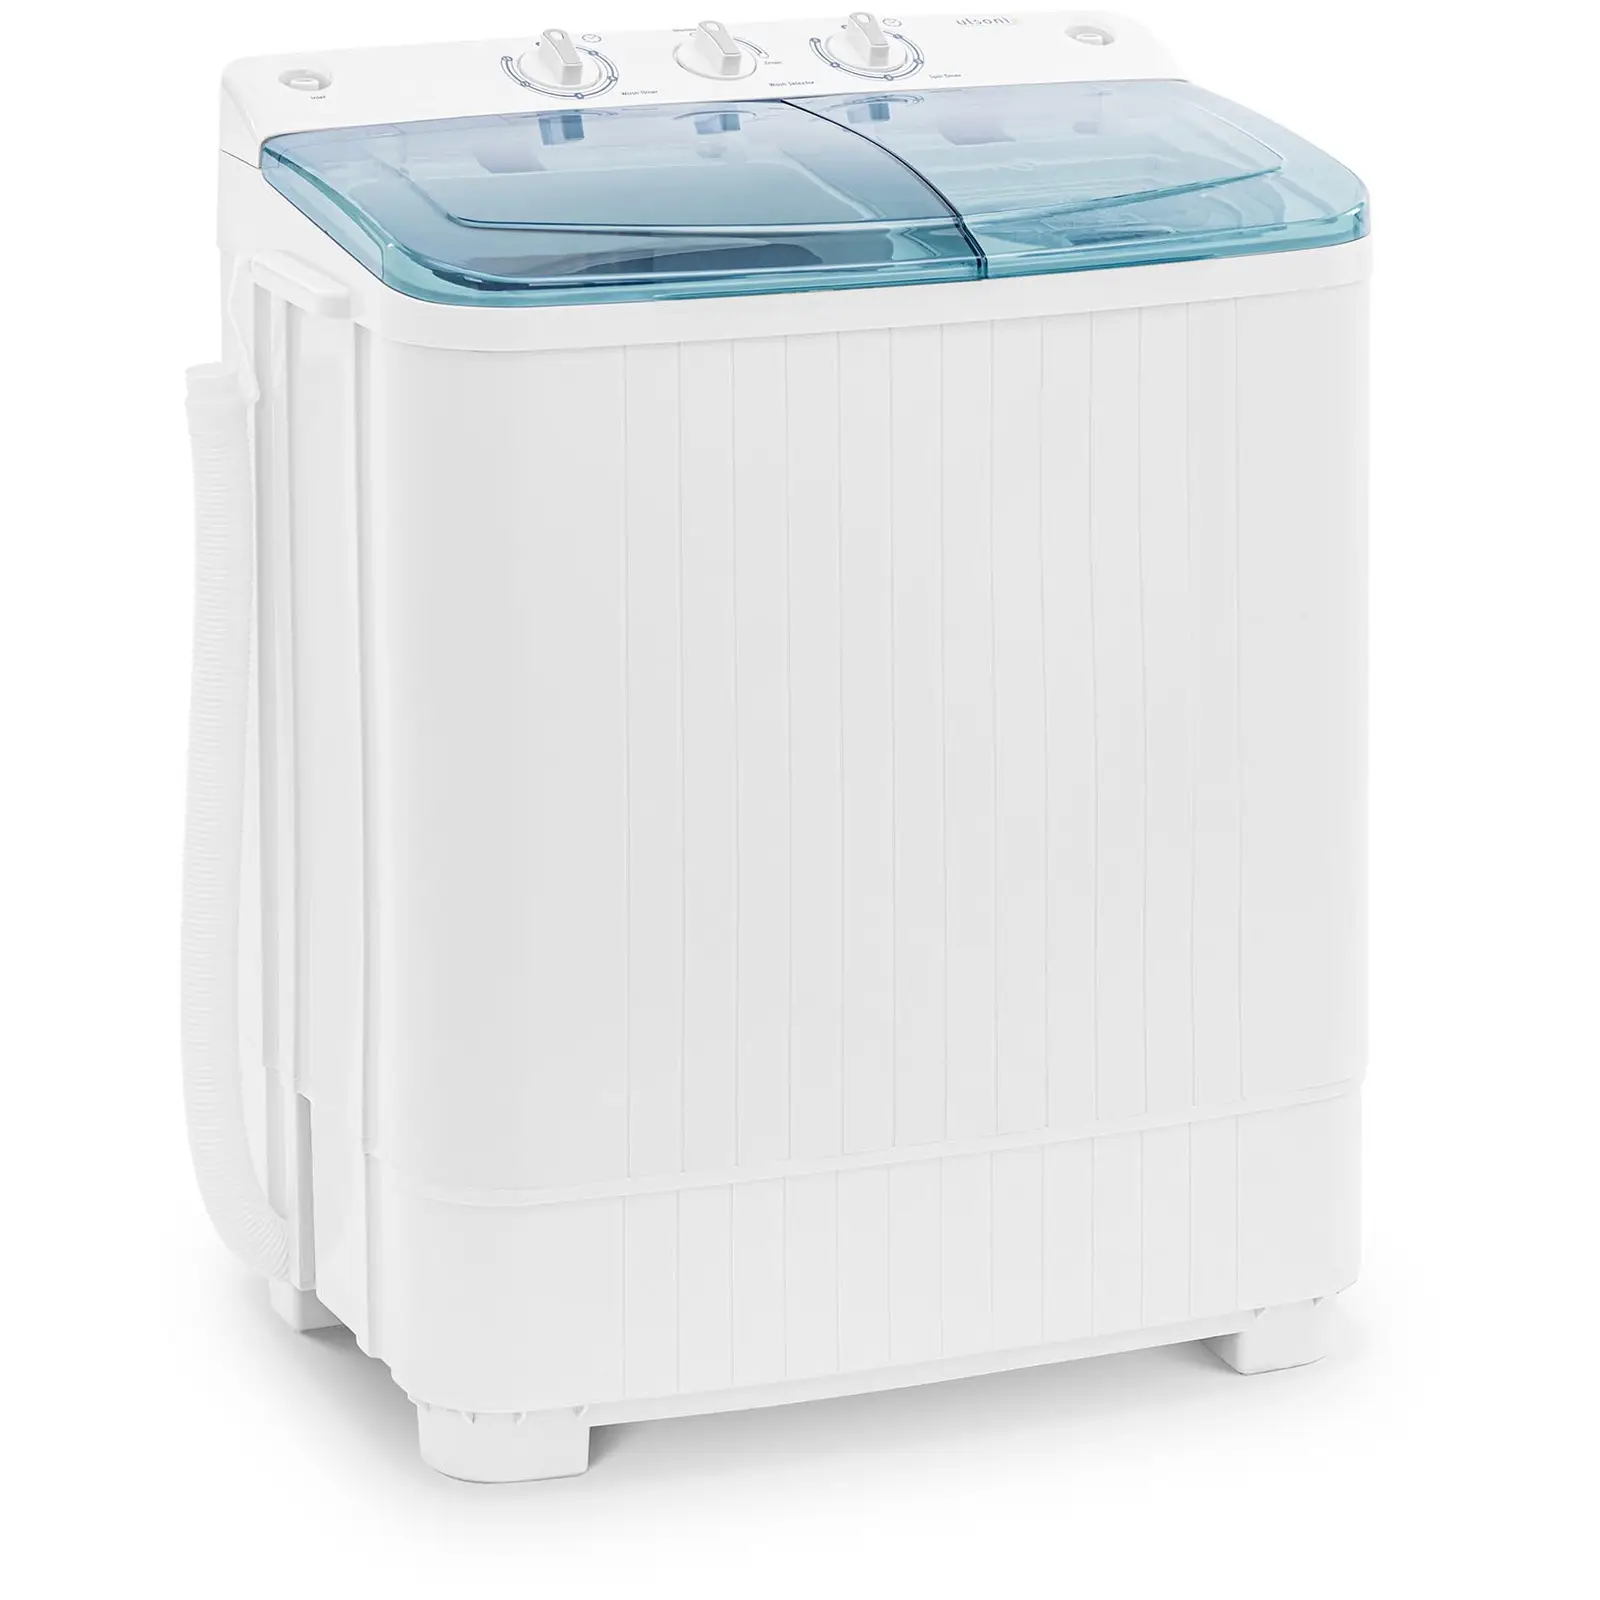 Portable Washing Machine - semi-automatic - with separate spin - 5 kg - 280 W